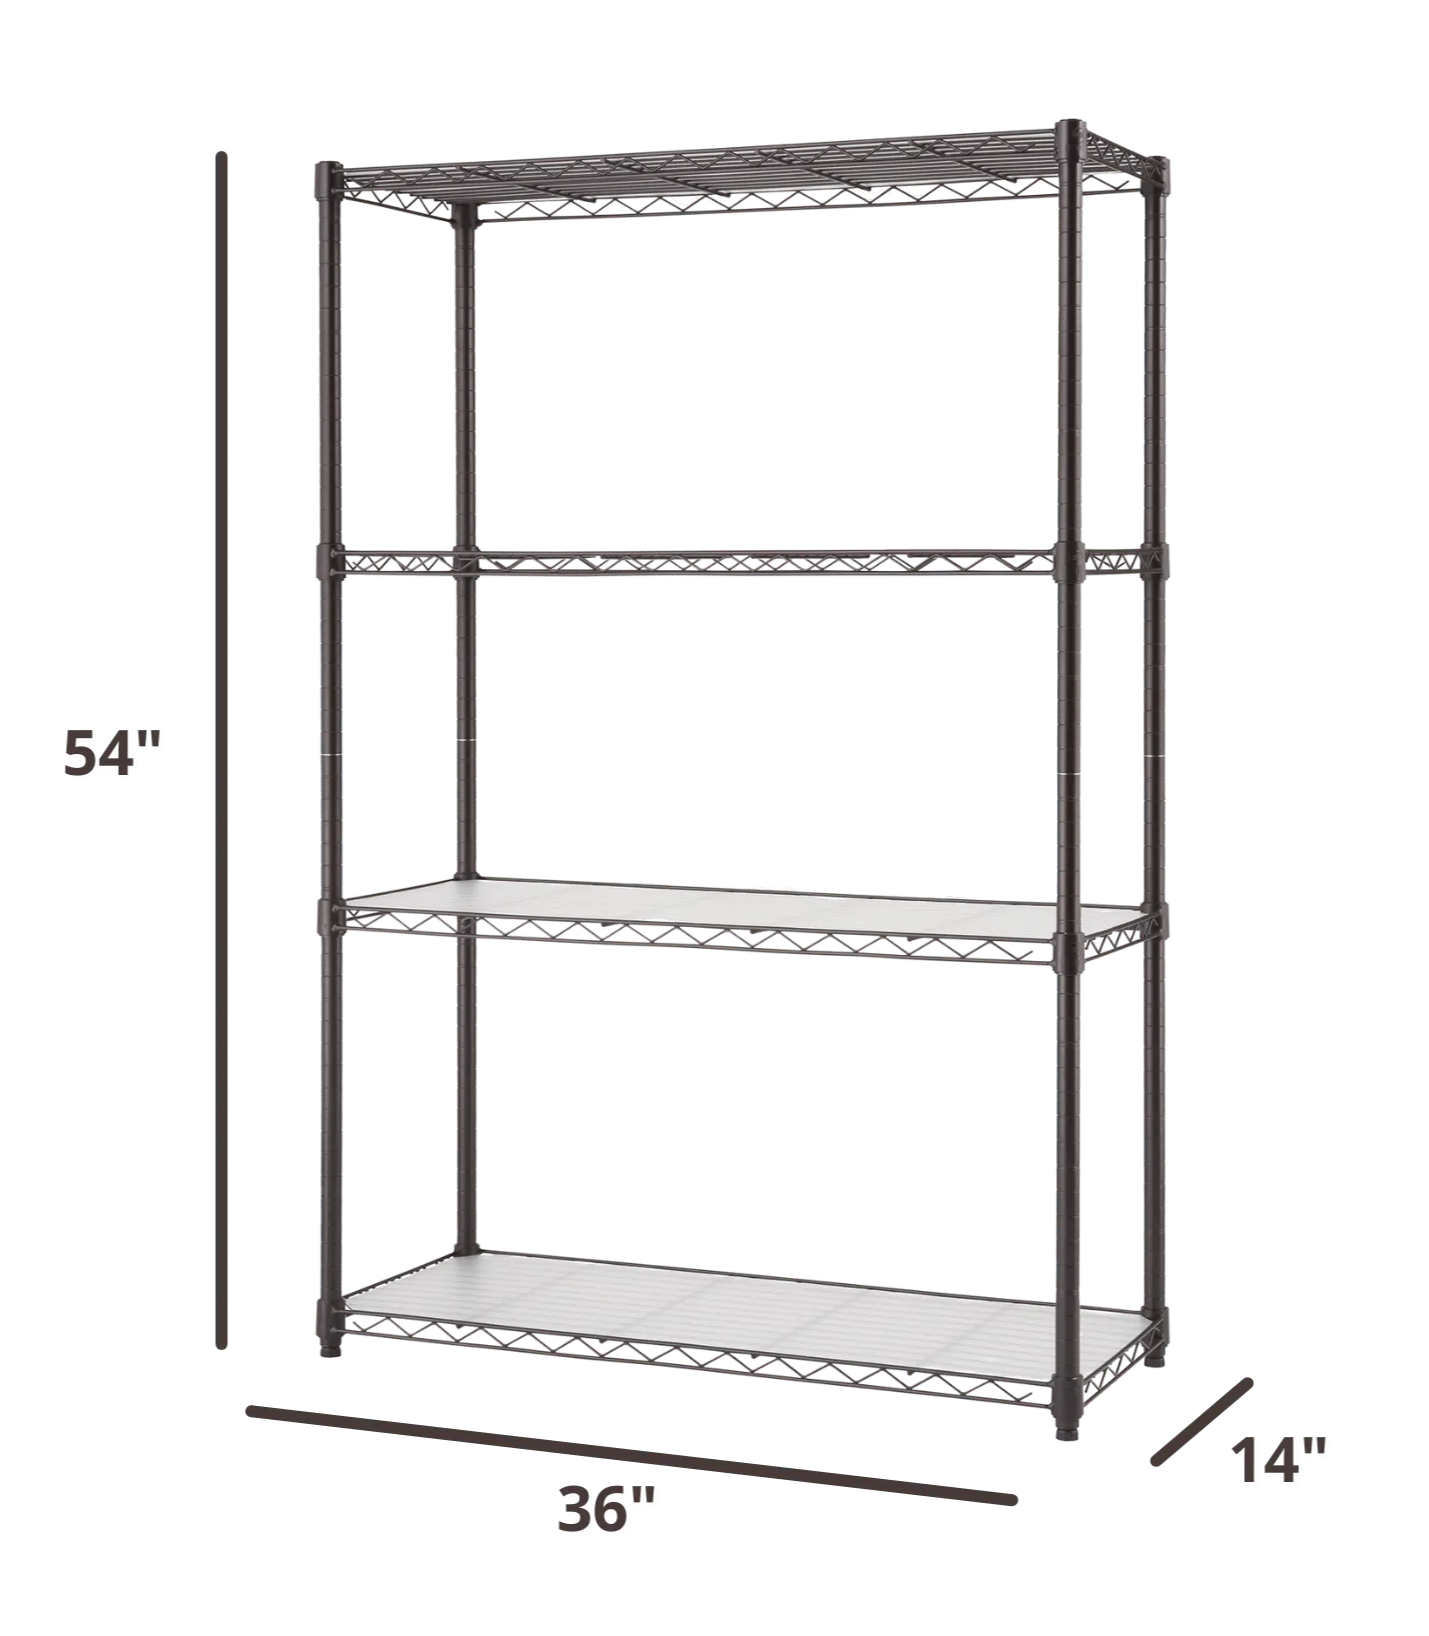 36 inches wide by 54 inches tall bronze wire shelving rack